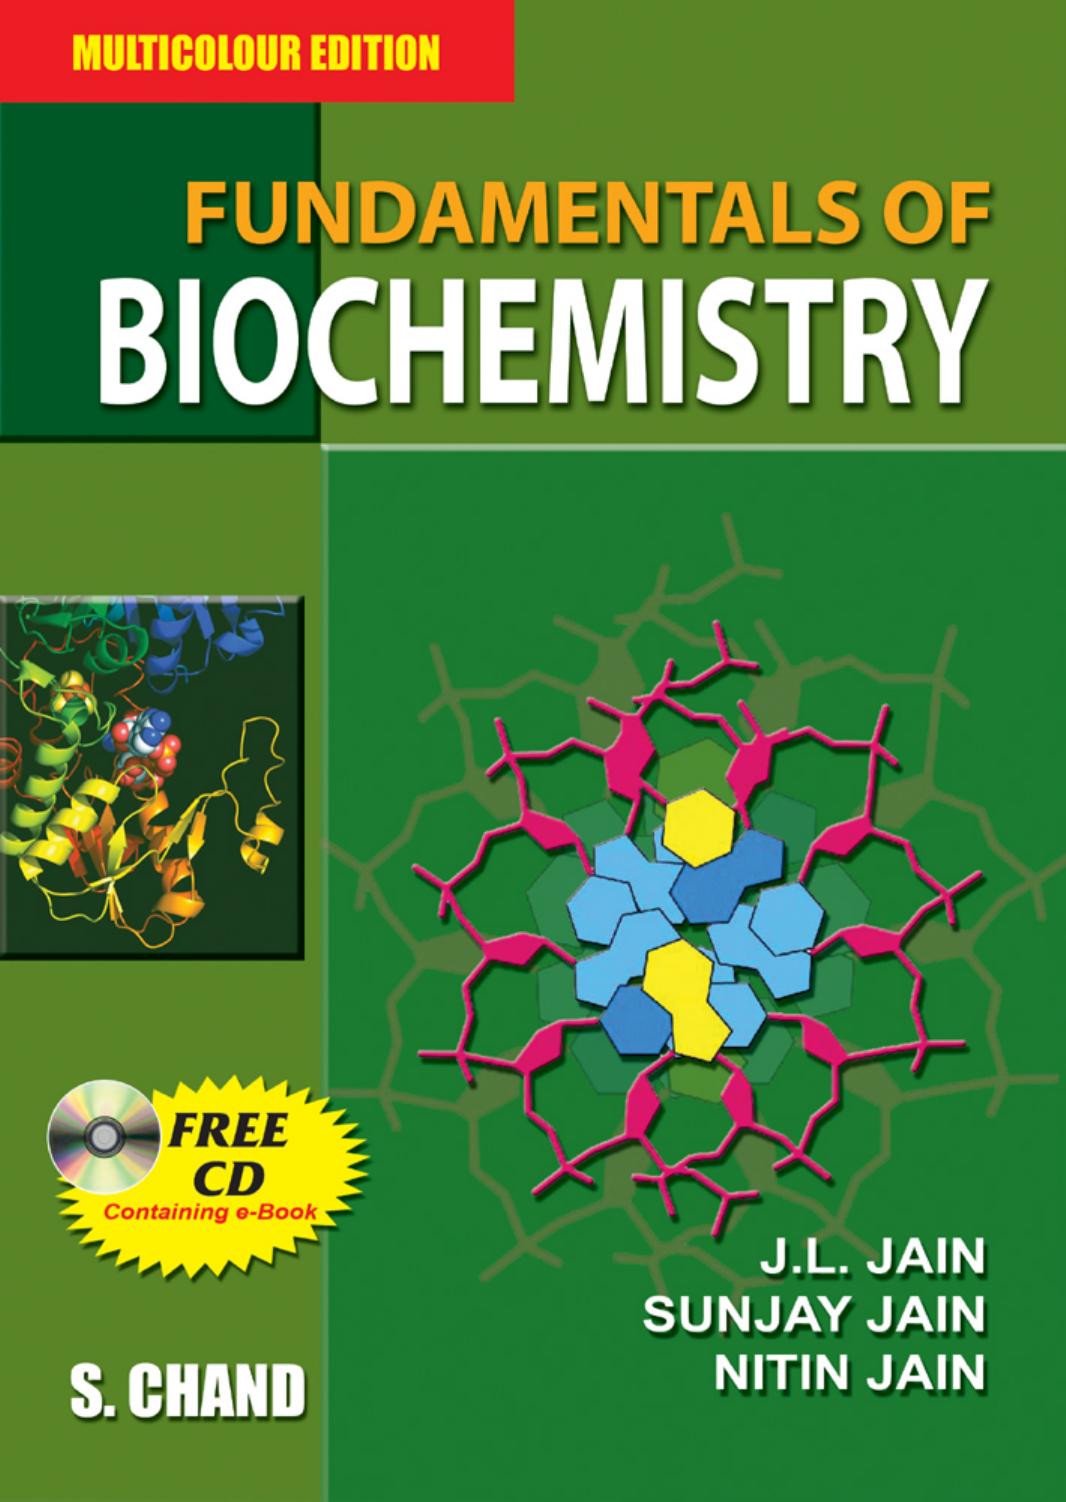 Fundamentals of Biochemistry. For University and College in India and Abroad 2017